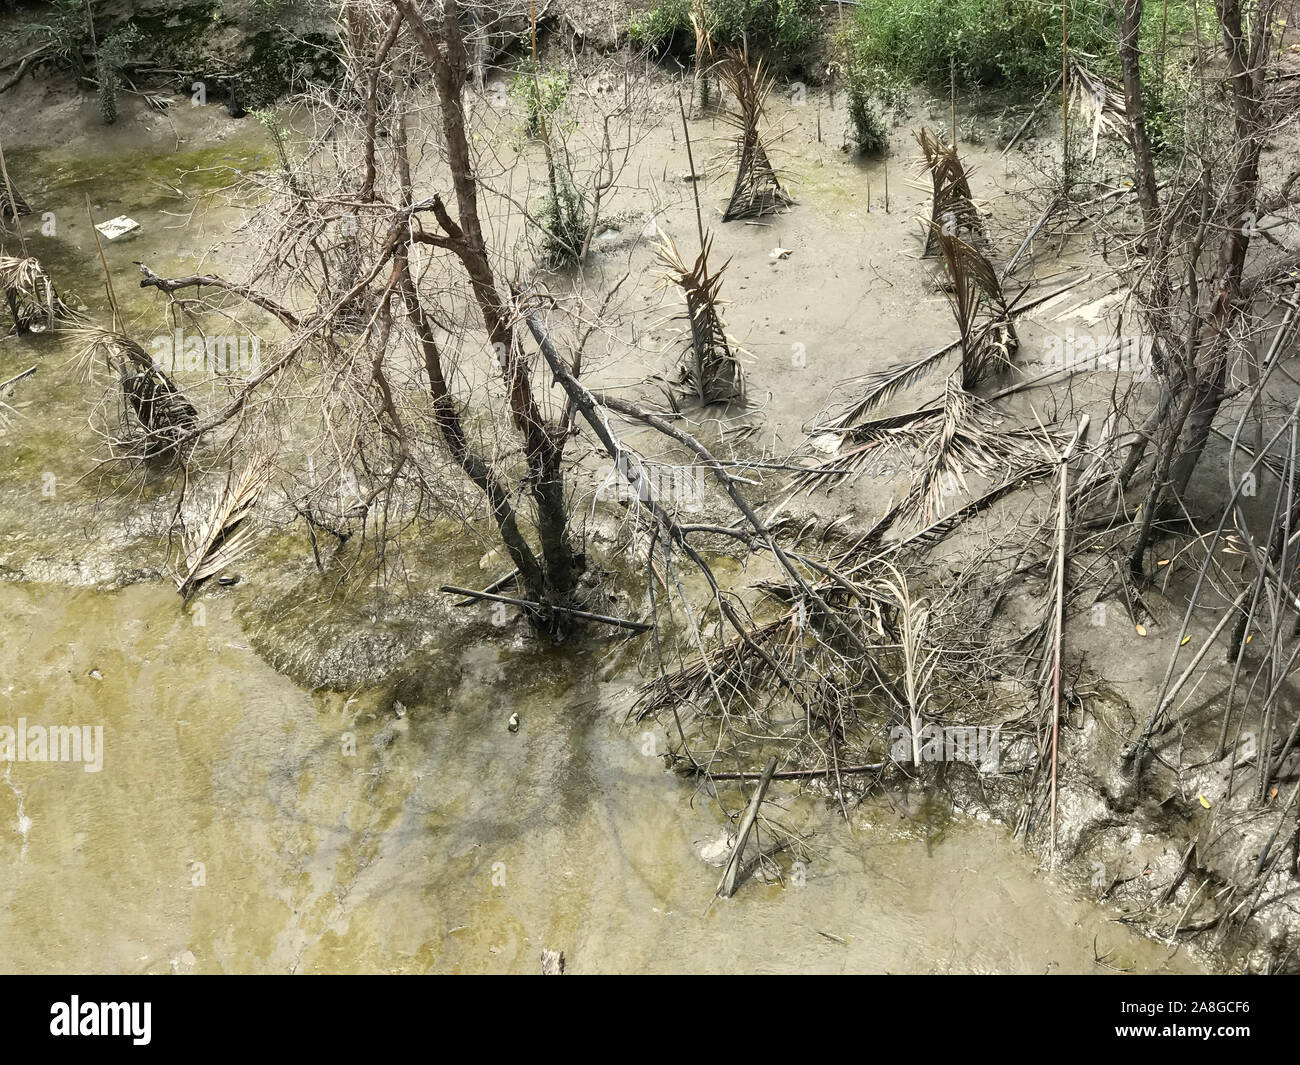 A mud coast of a water canal with trees, Samut Prakan, Thailand Stock Photo